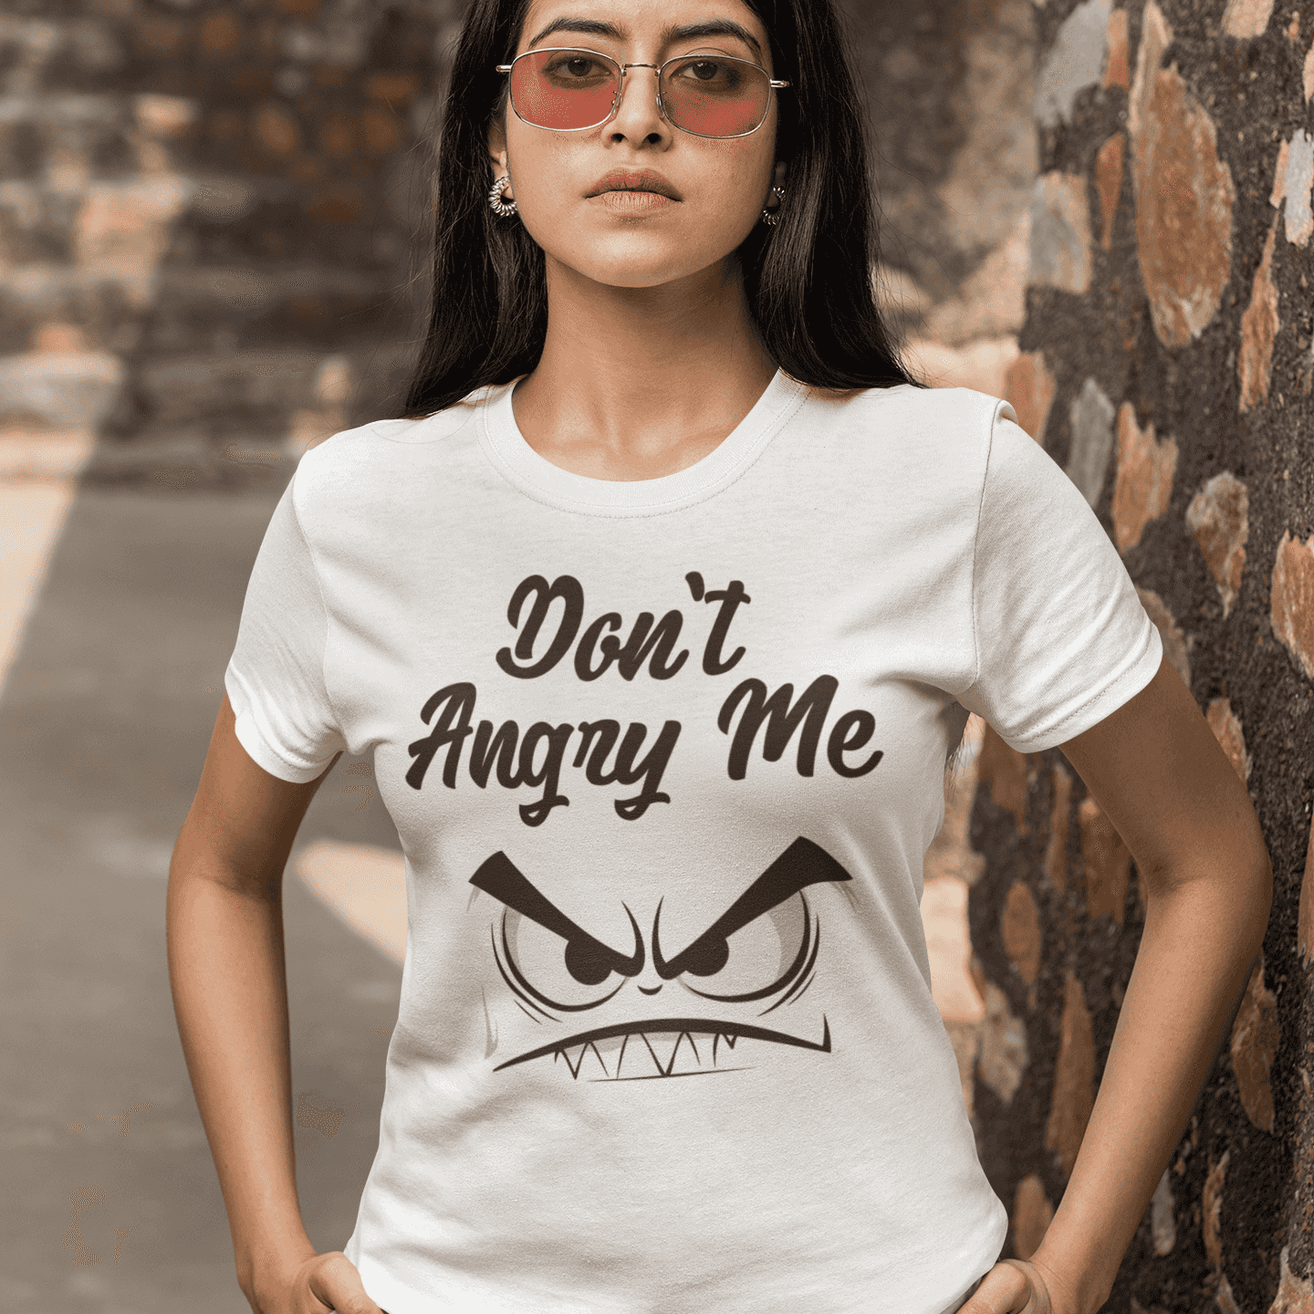 Don't Angry Me" Women's Graphic T-Shirt – Fierce Elegance